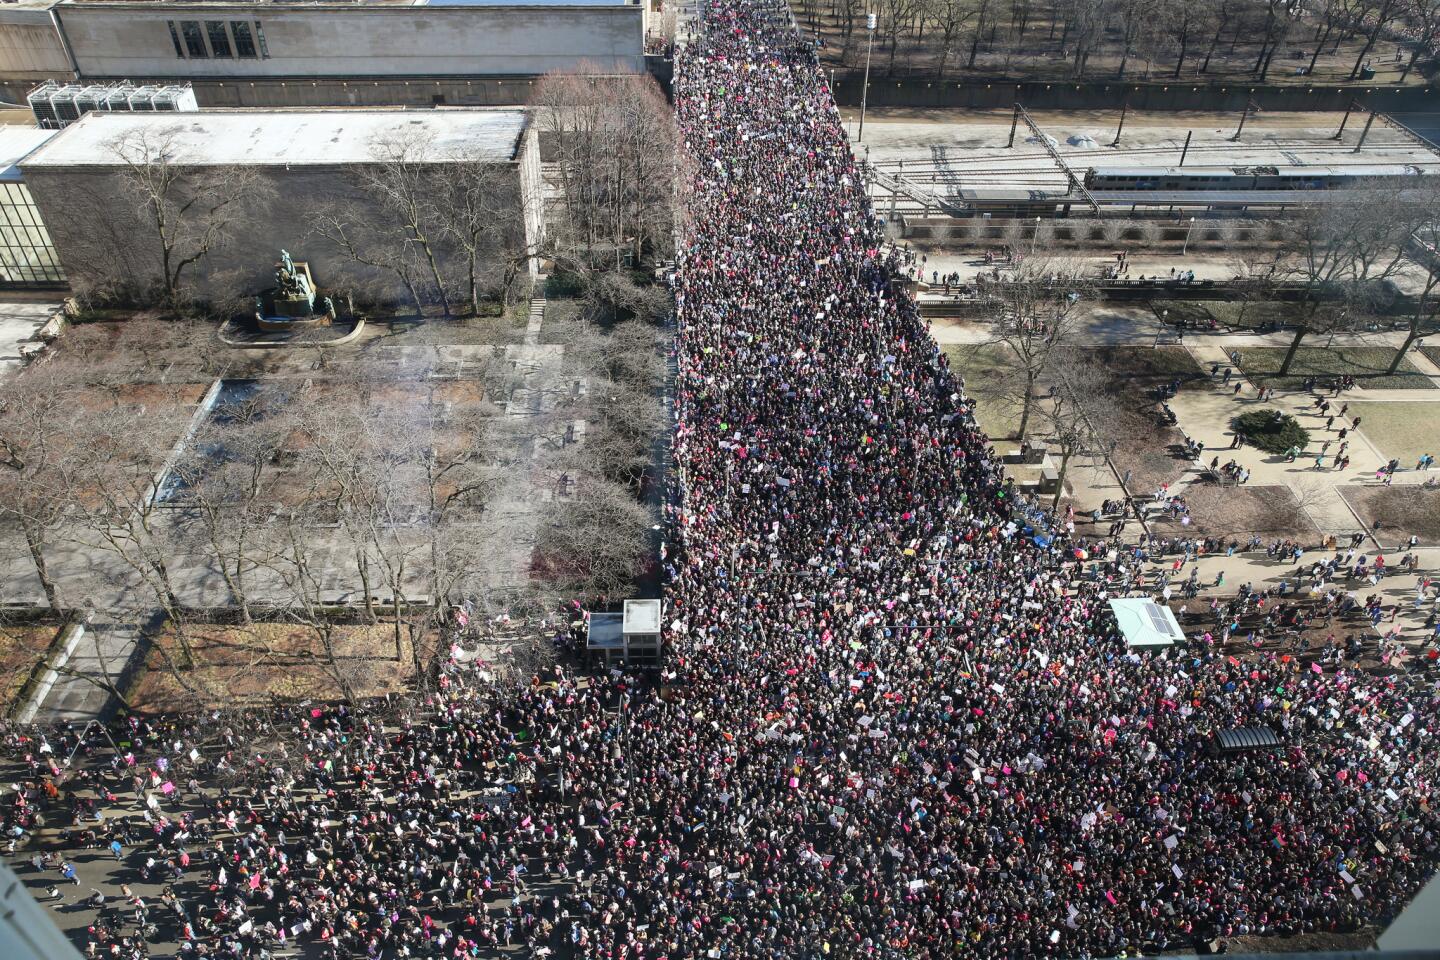 Crowds gather for the Women's March in Chicago on Jan. 21, 2017.